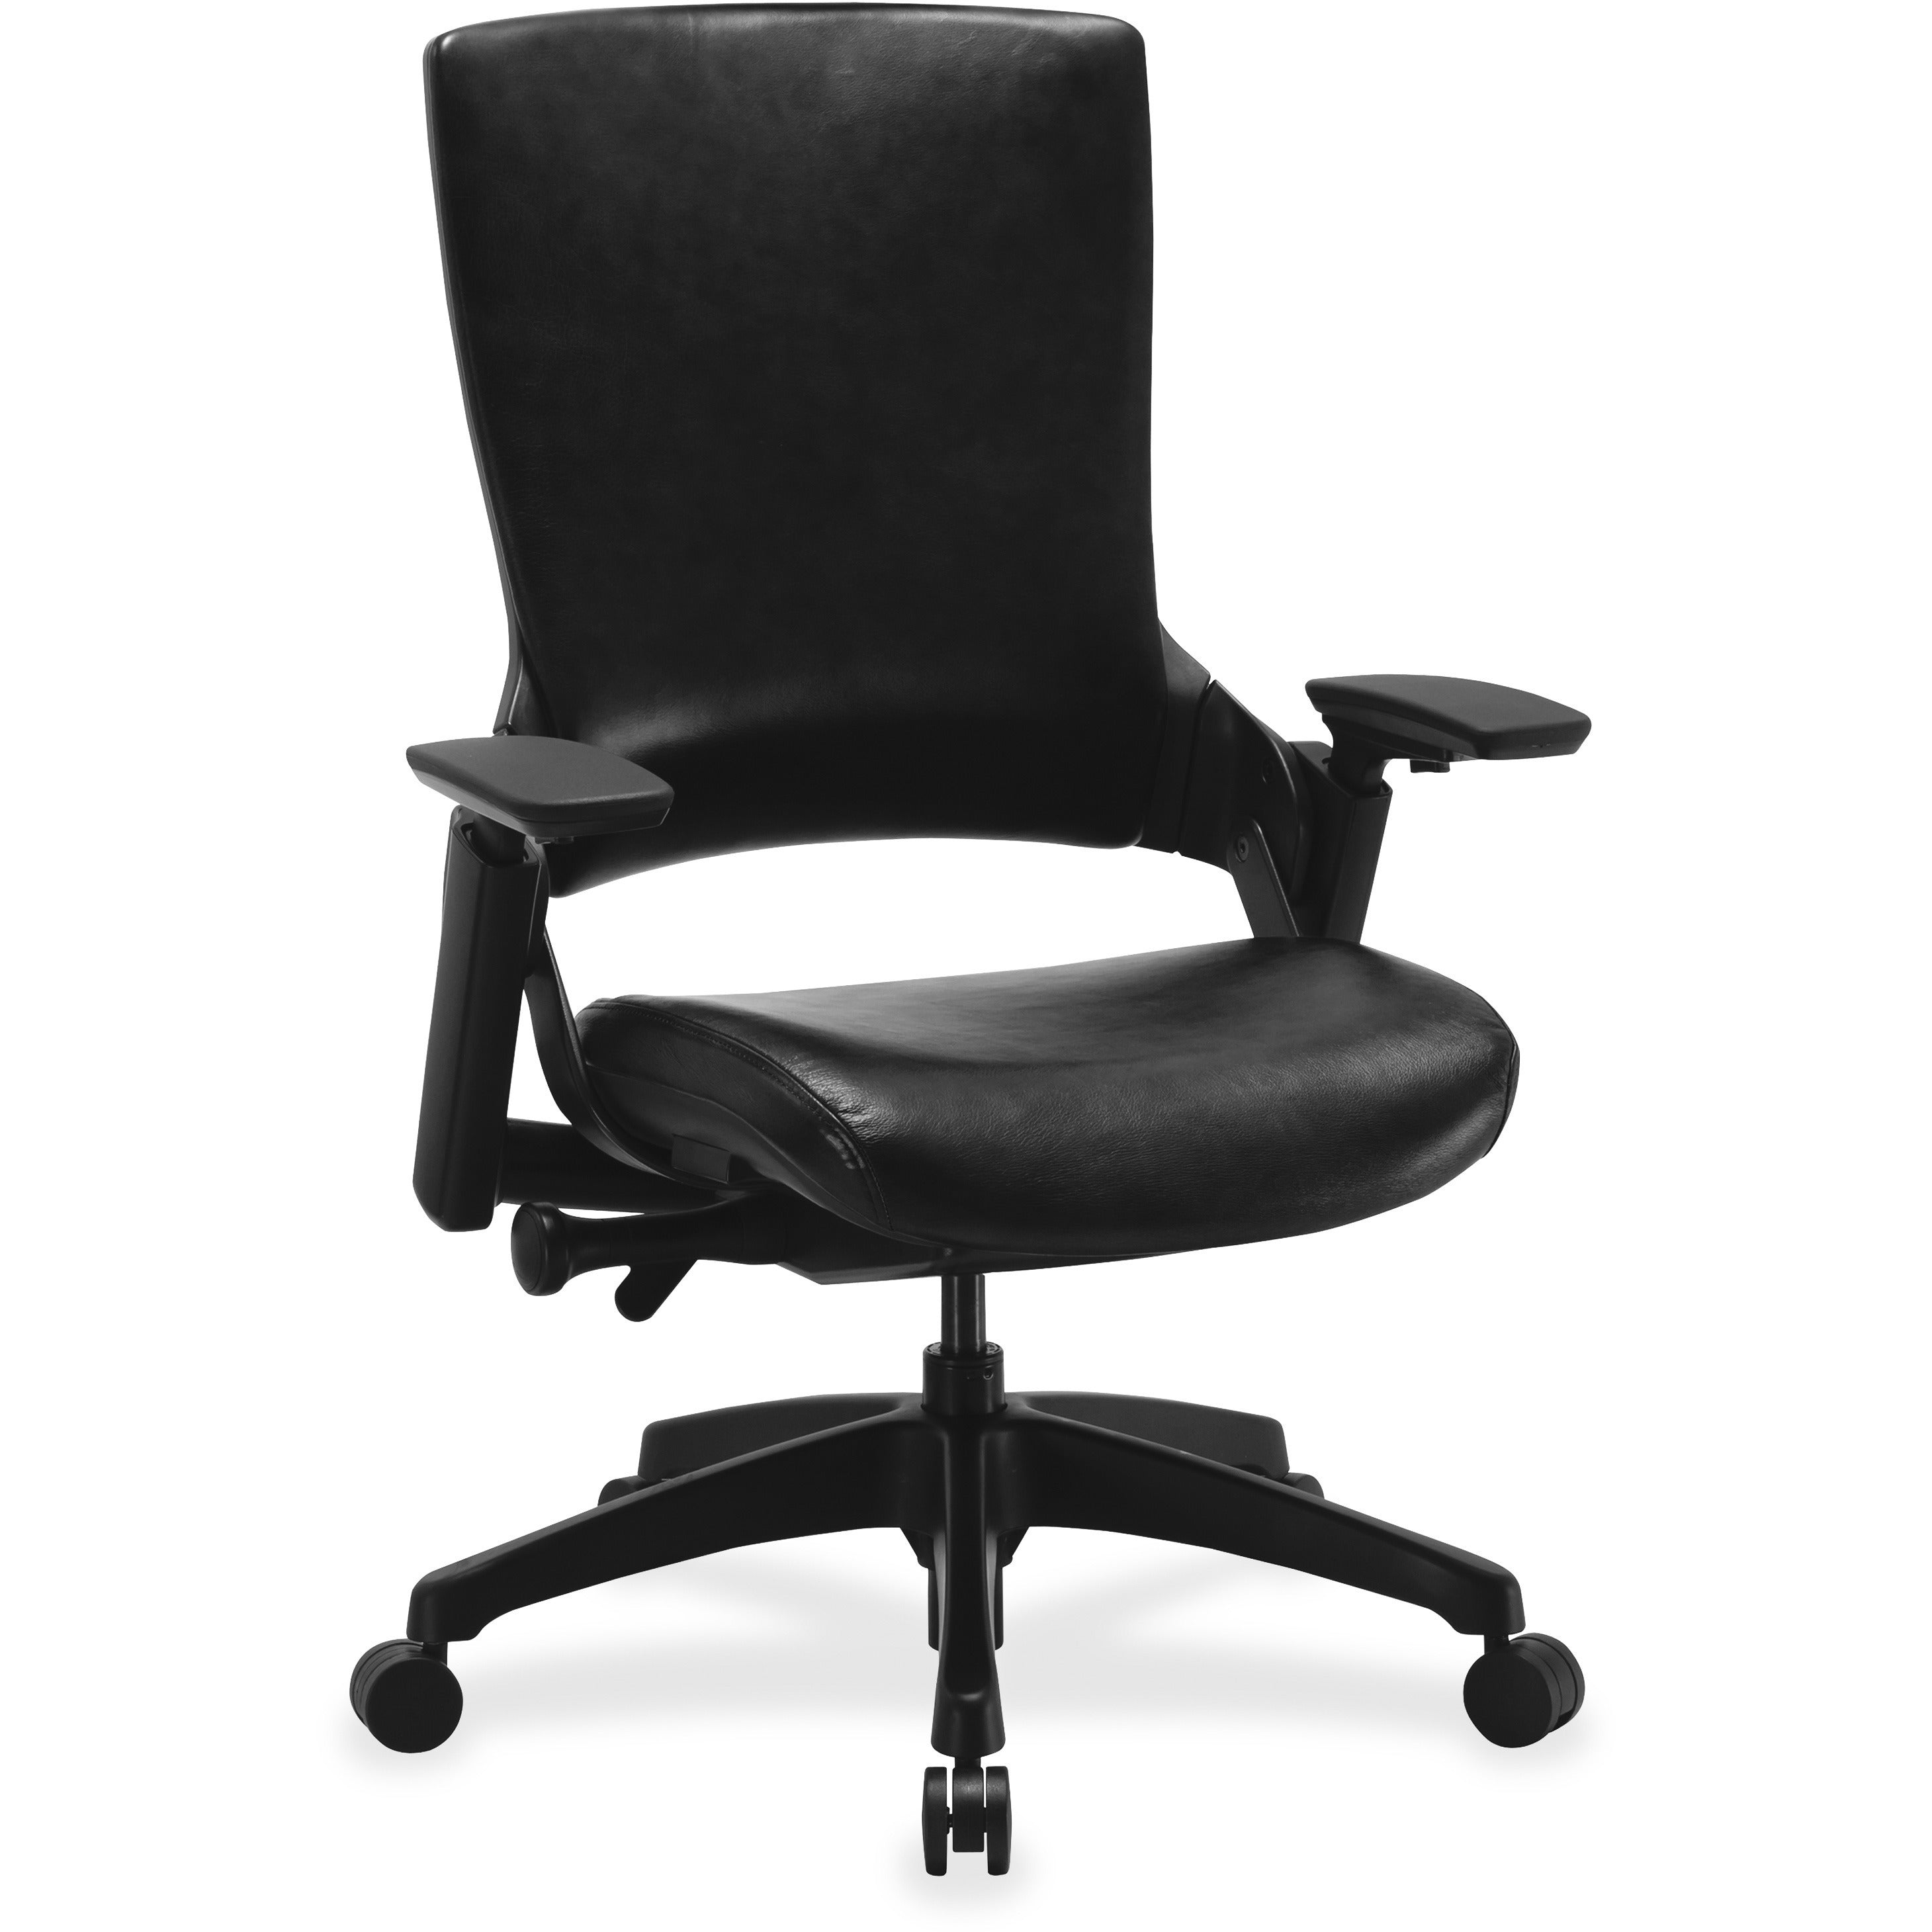 Lorell Serenity Series Executive Multifunction High-back Chair - Leather Seat - Leather Back - High Back - 1 Each - 